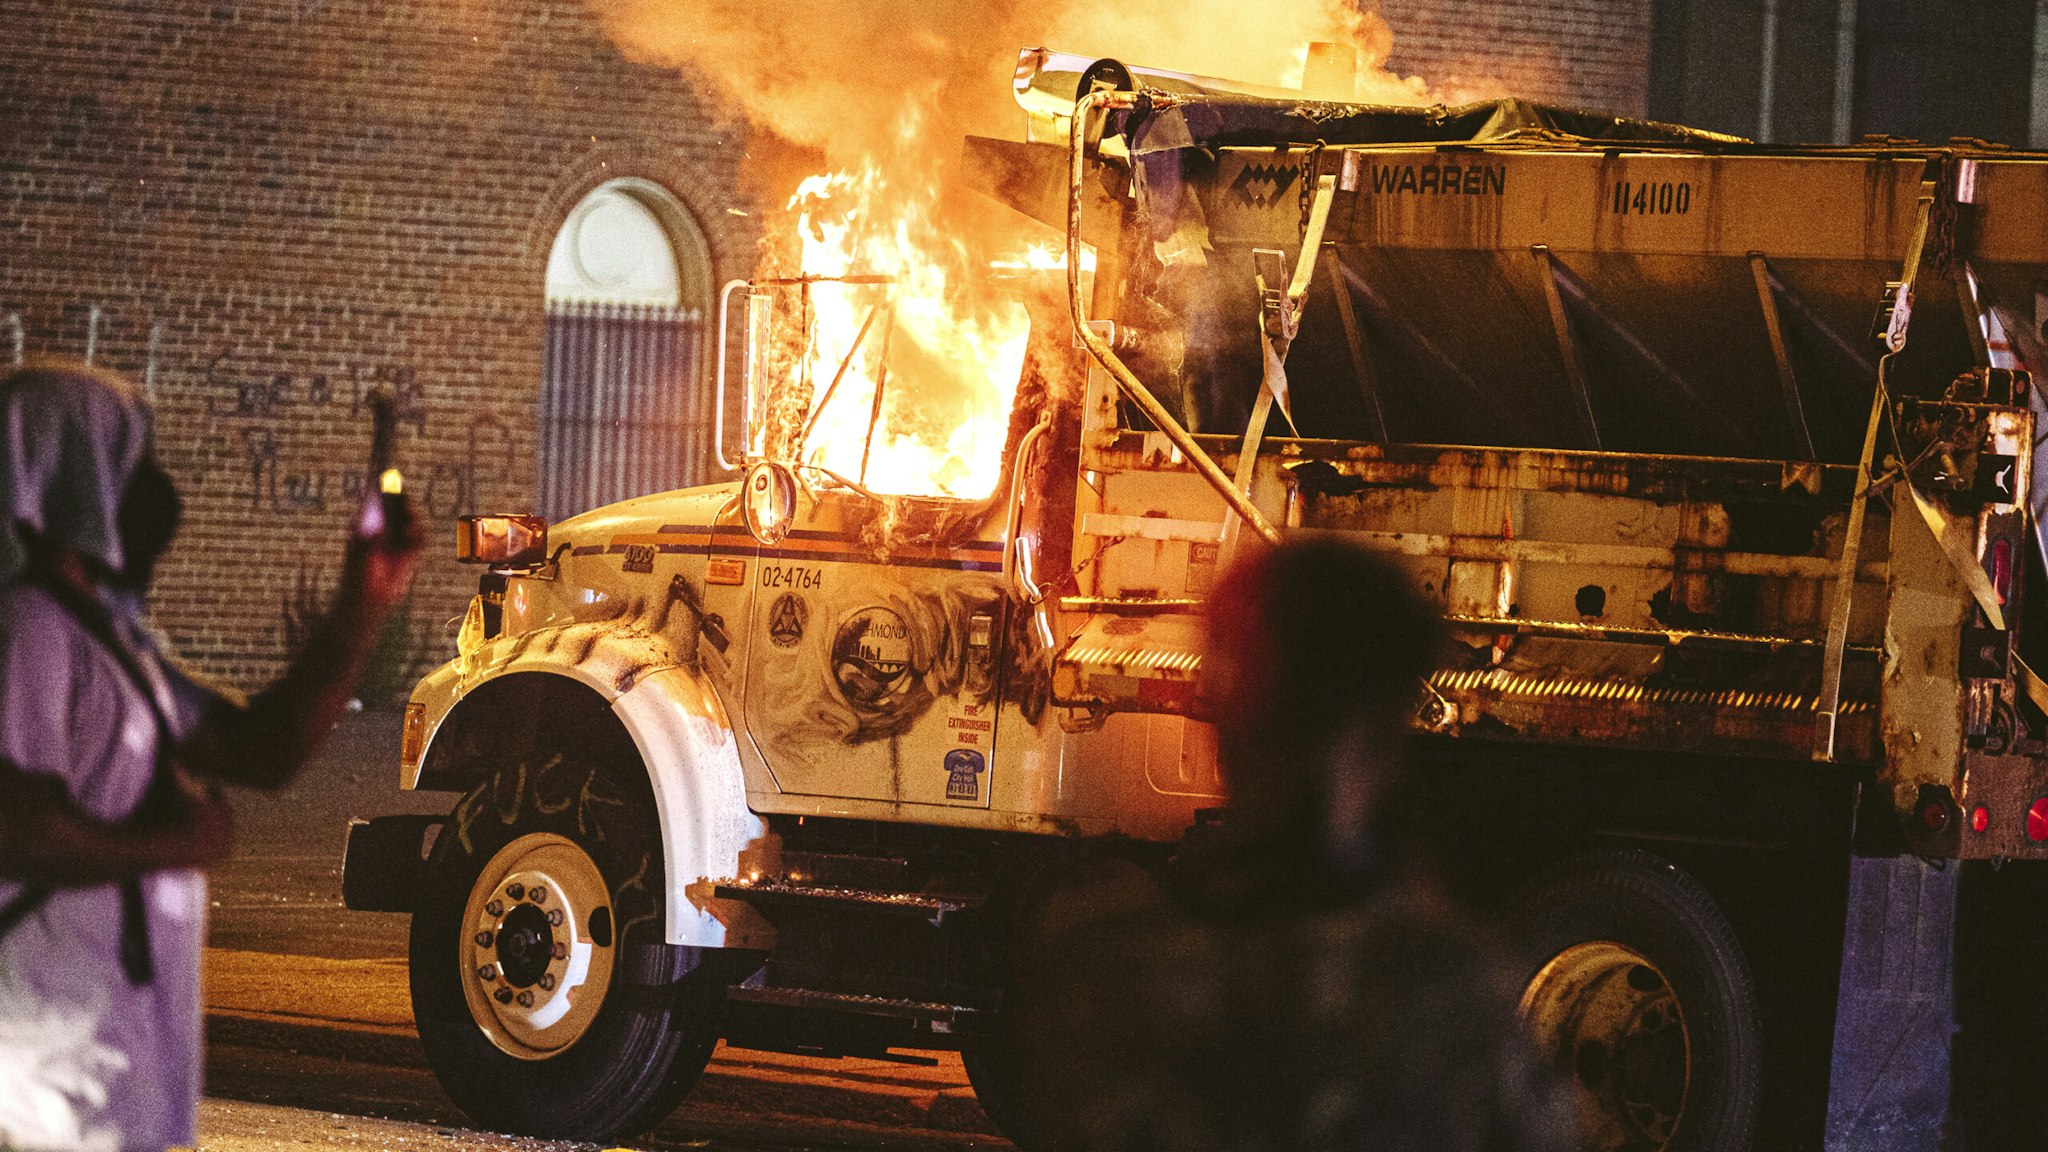 A parked truck is set on fire on July 25, 2020 in Richmond, Virginia. Protesters in Richmond took to the streets to join other protesters around the country for the Stand With Portland rally in support of the Black Lives Matter protesters in Portland, Oregon.